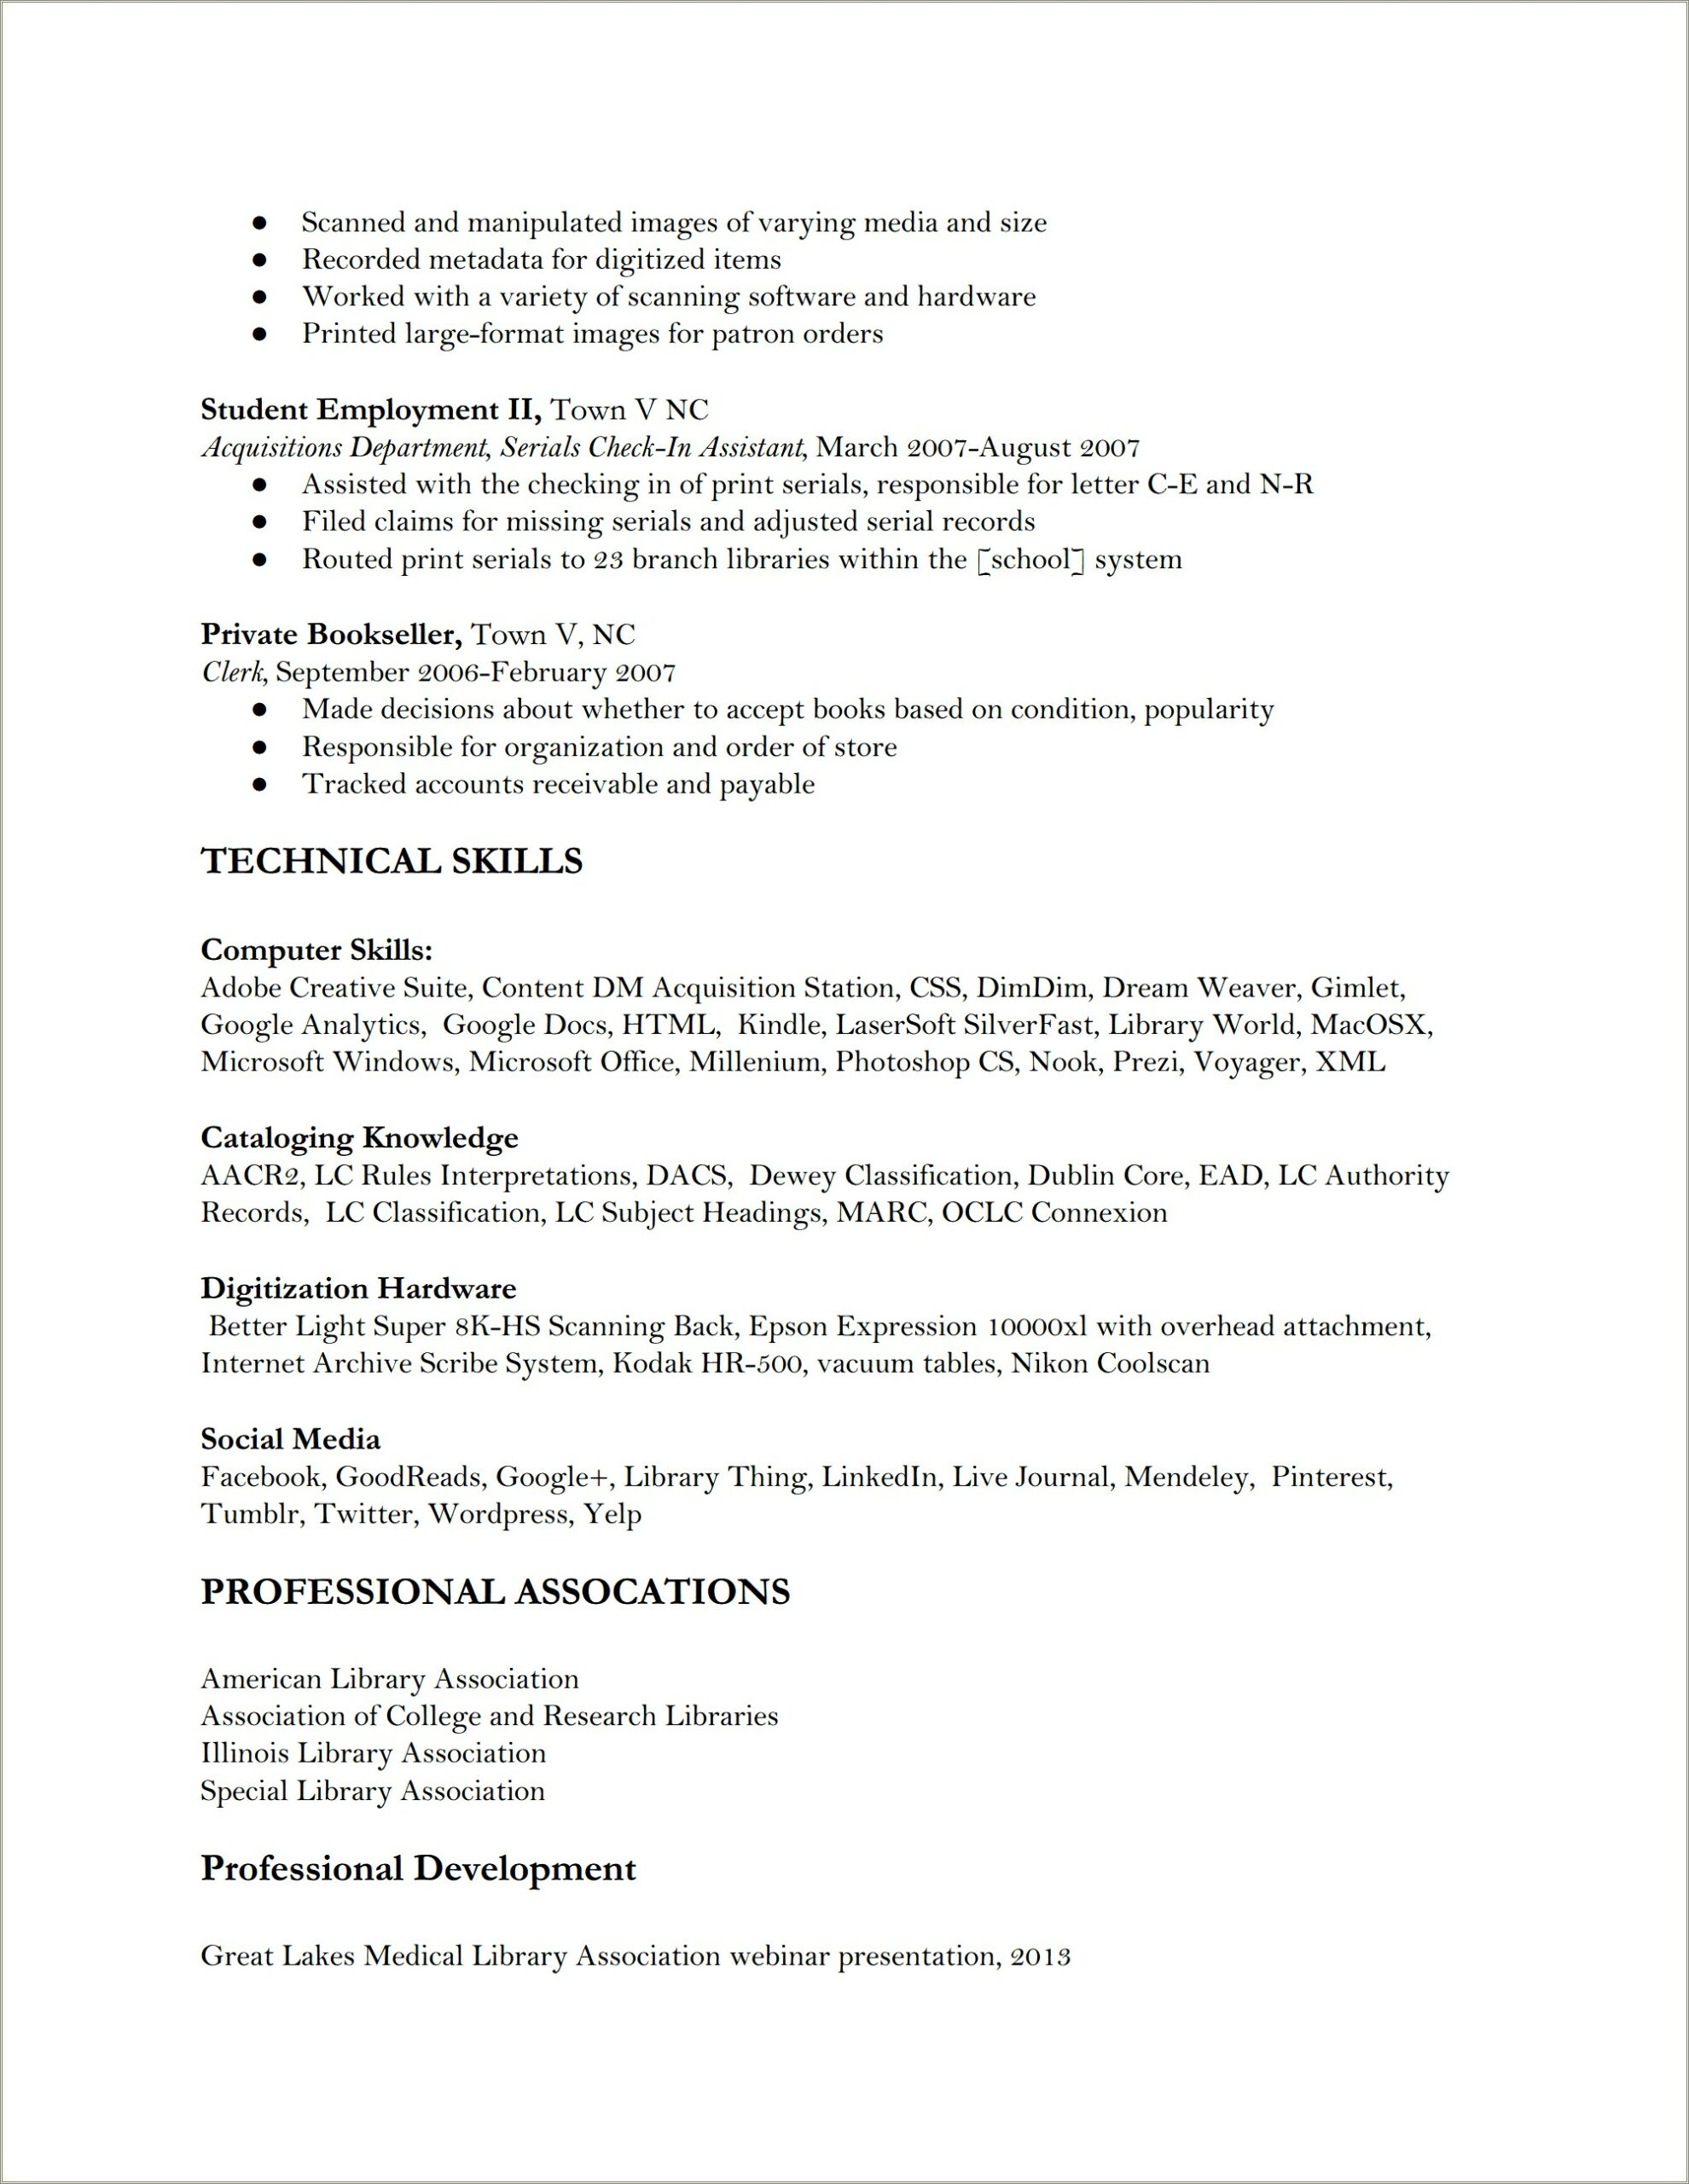 Free Resume Review Public Library Illinois